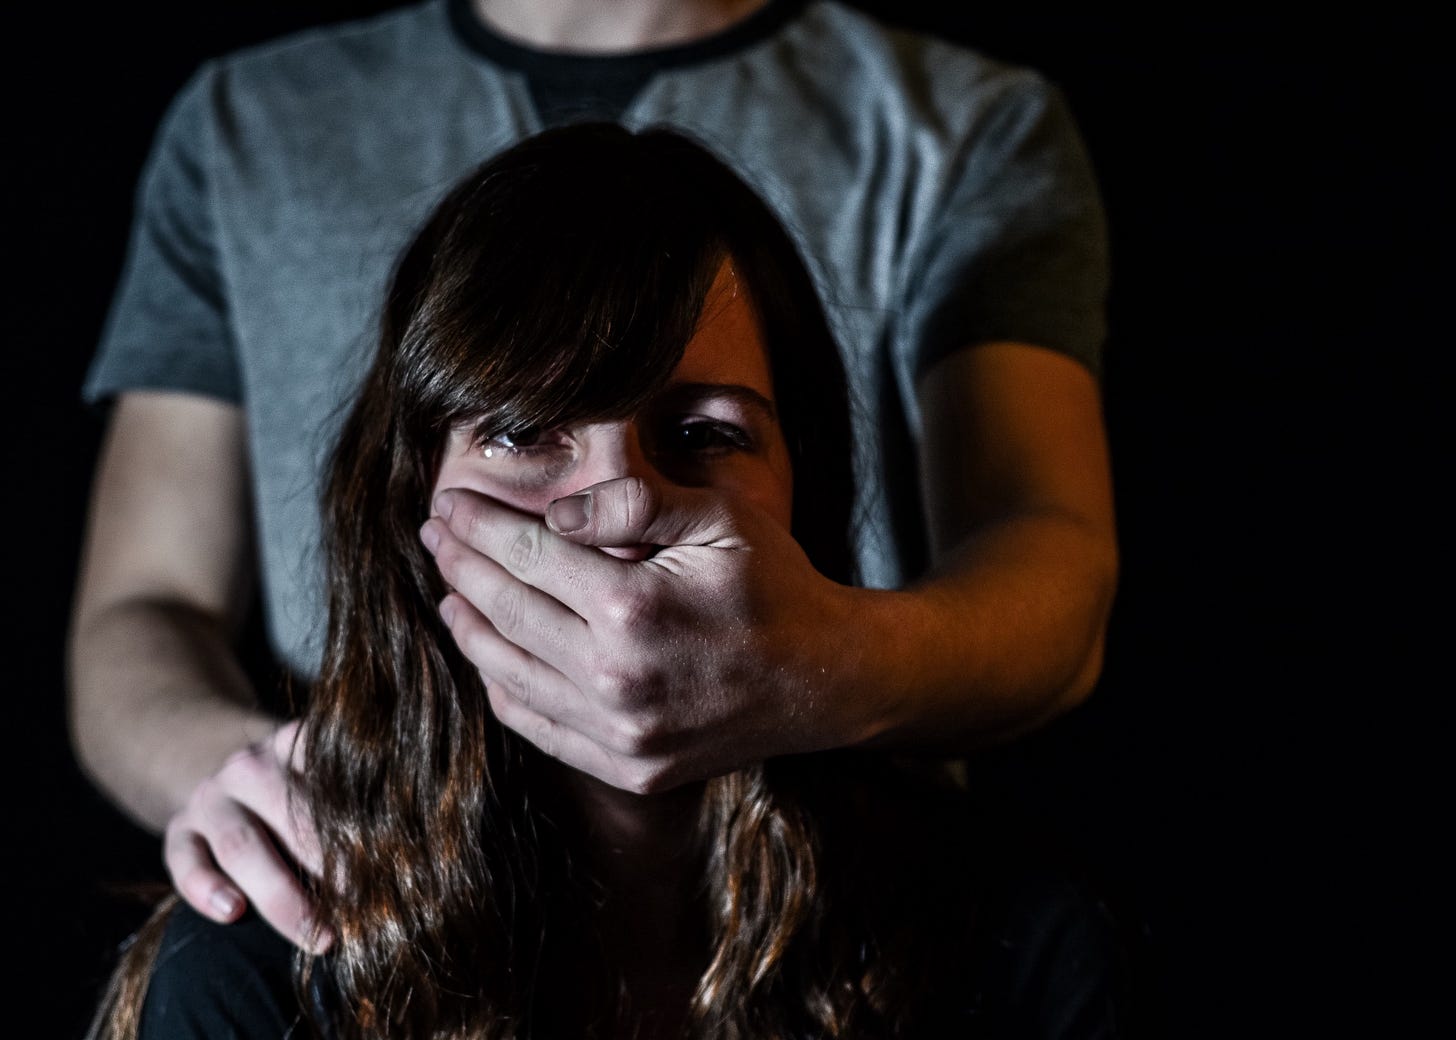 A woman cries silently as her partner covers her mouth forcefully with his hand from behind.